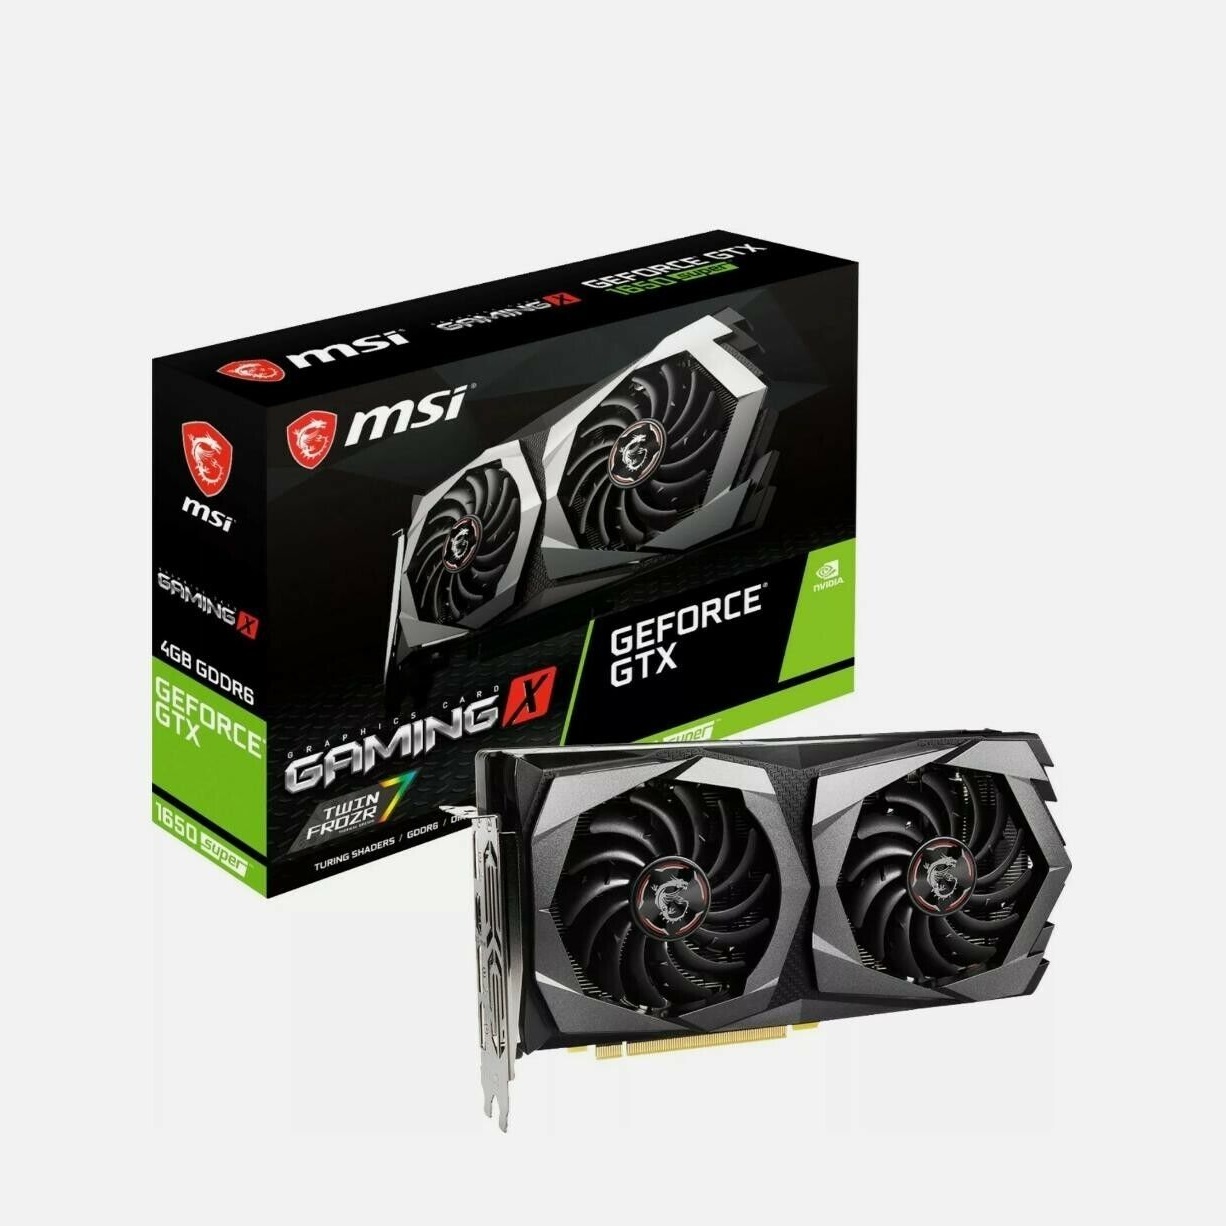 NVIDIA GeForce GTX 1650 Graphics Cards Available at Overclockers UK